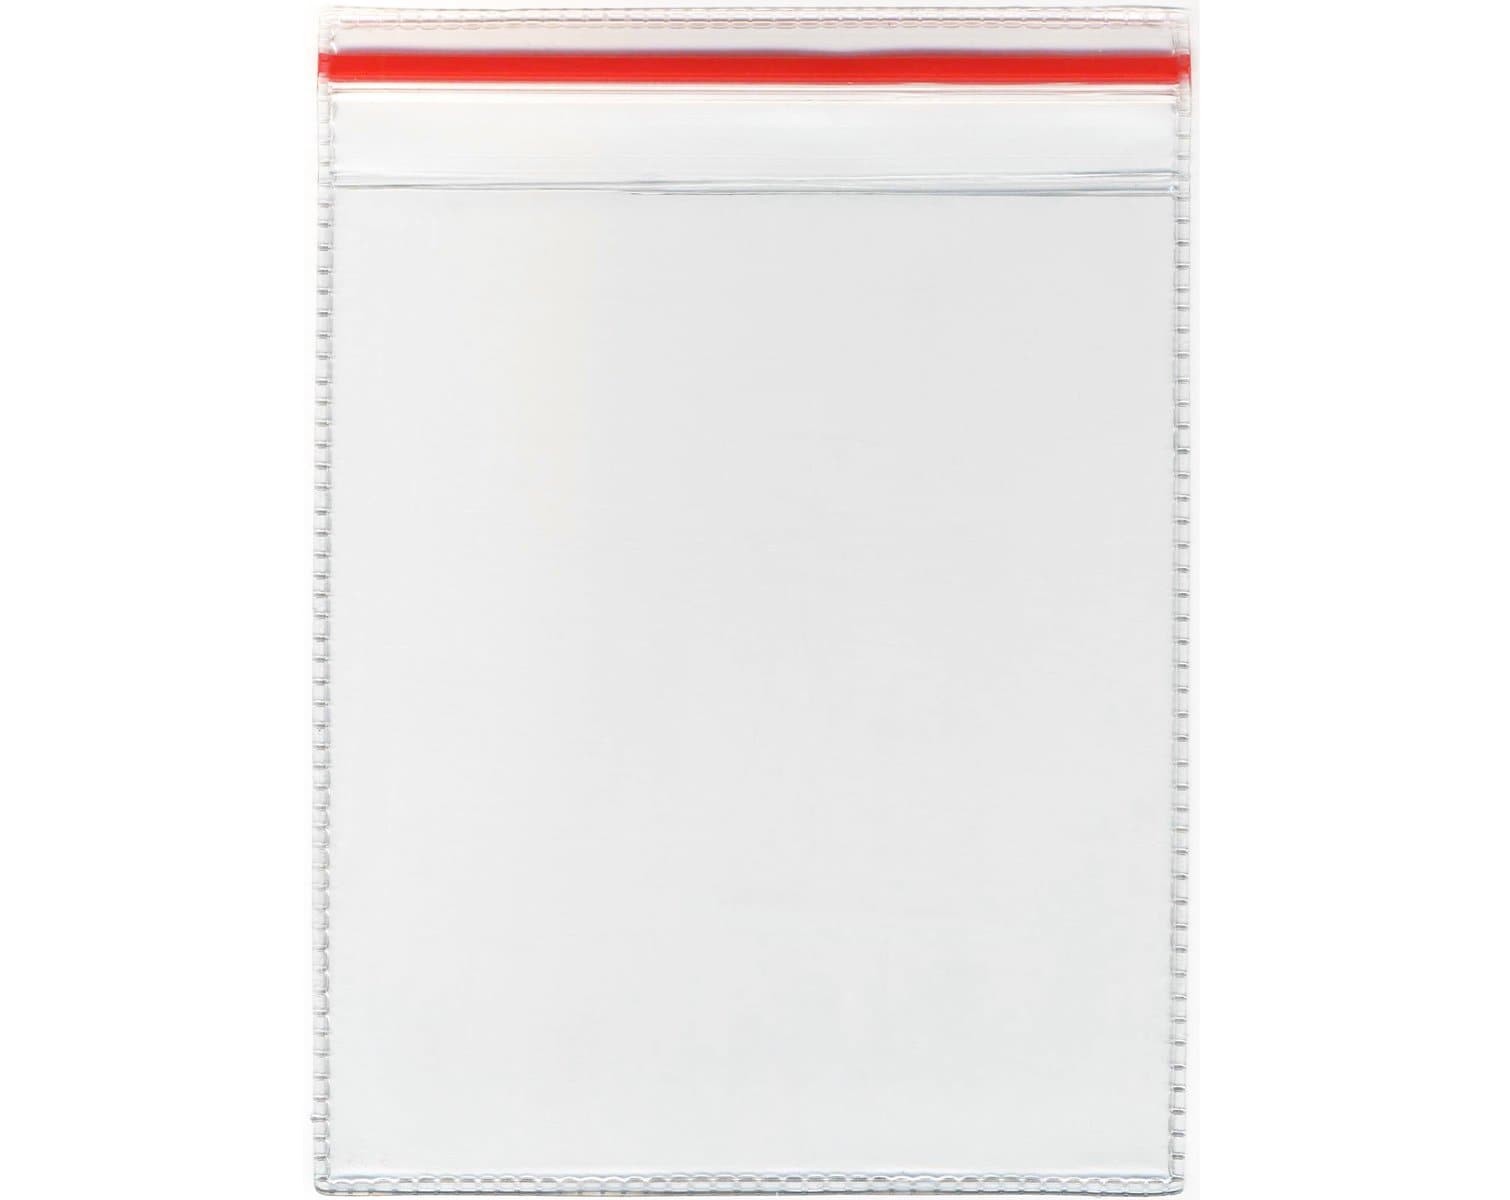 Plastic wallet to display a piece of equipment's inspection status.